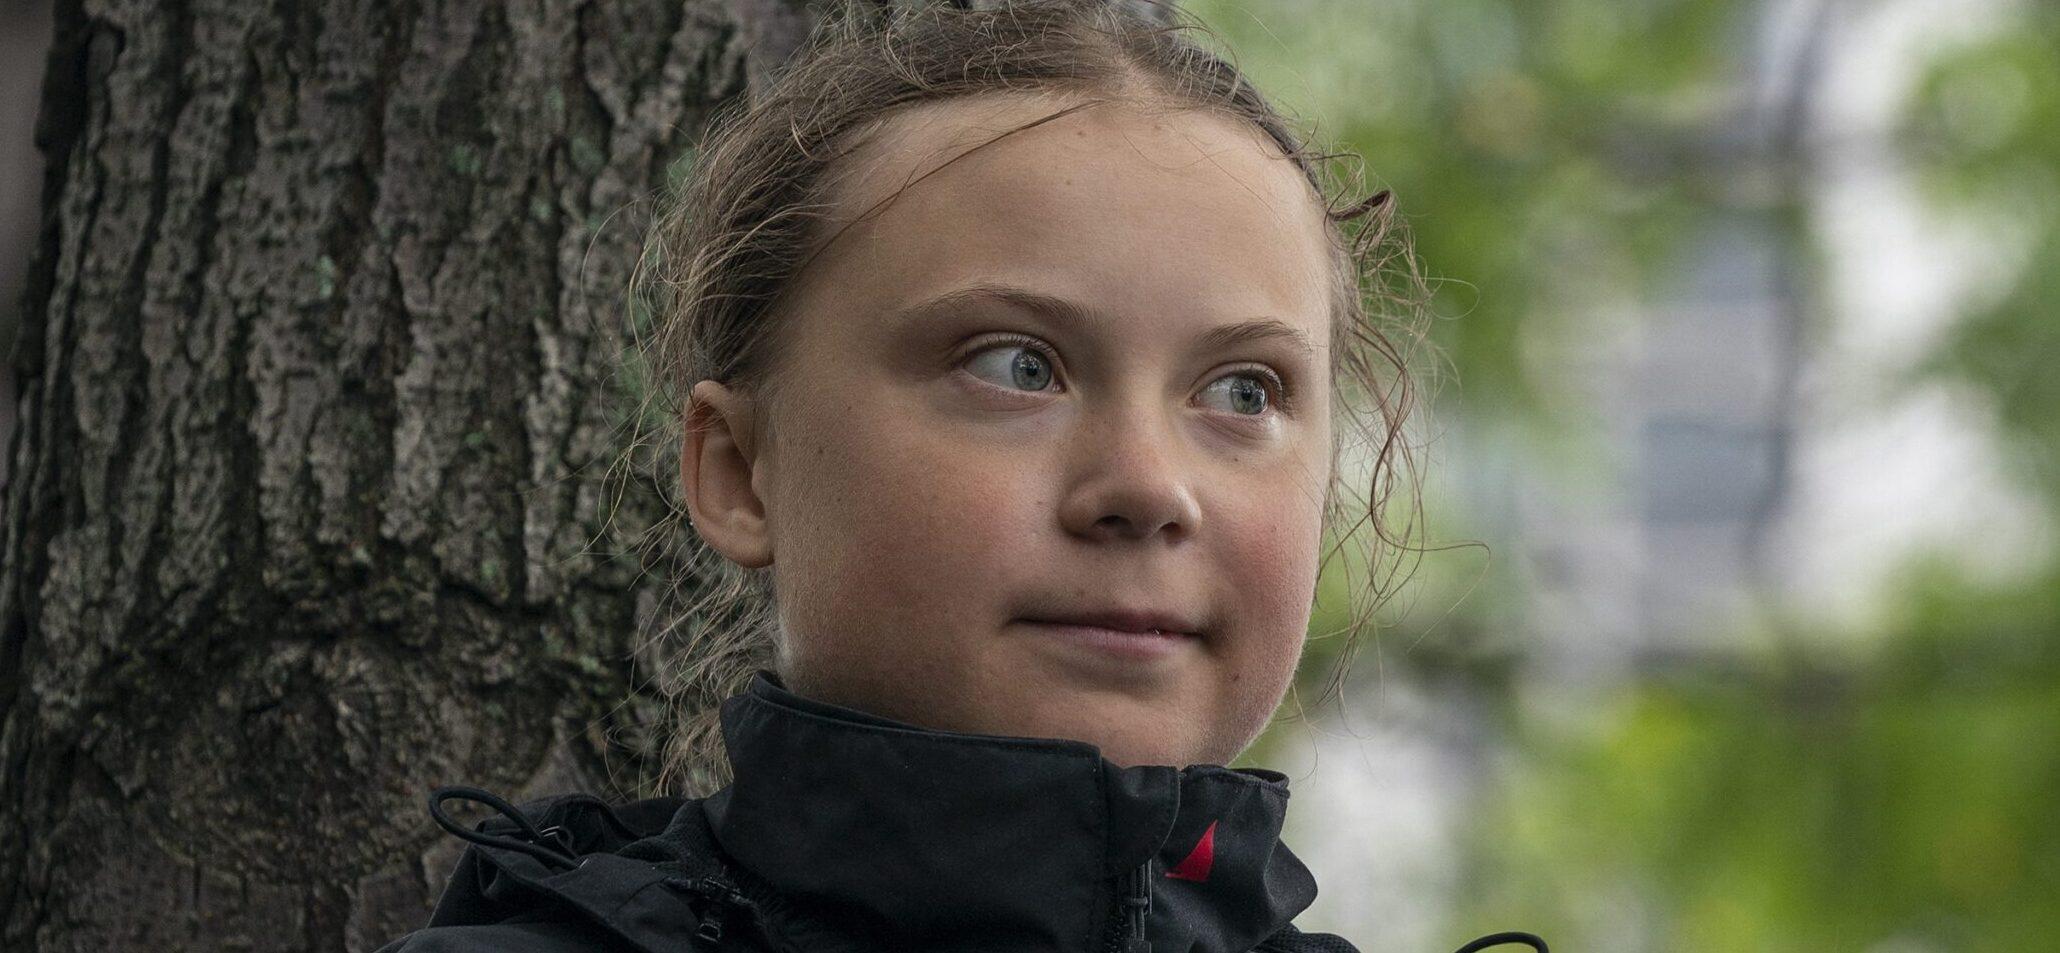 Climate activist Greta Thunberg arrives in NYC